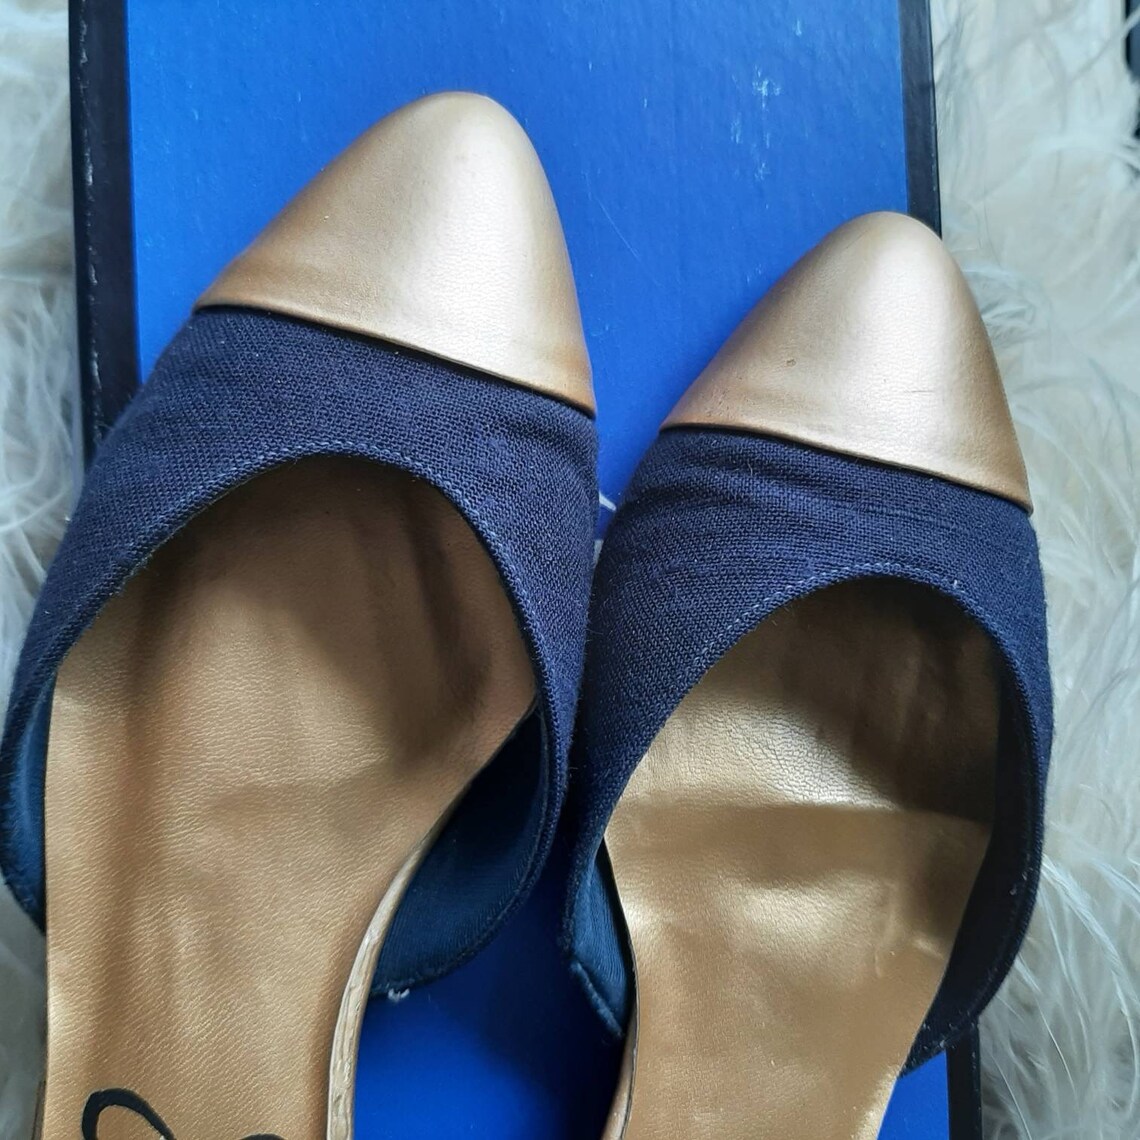 VINTAGE JOYCE SHOES 1960's Blue and Gold Slip on Shoes - Etsy